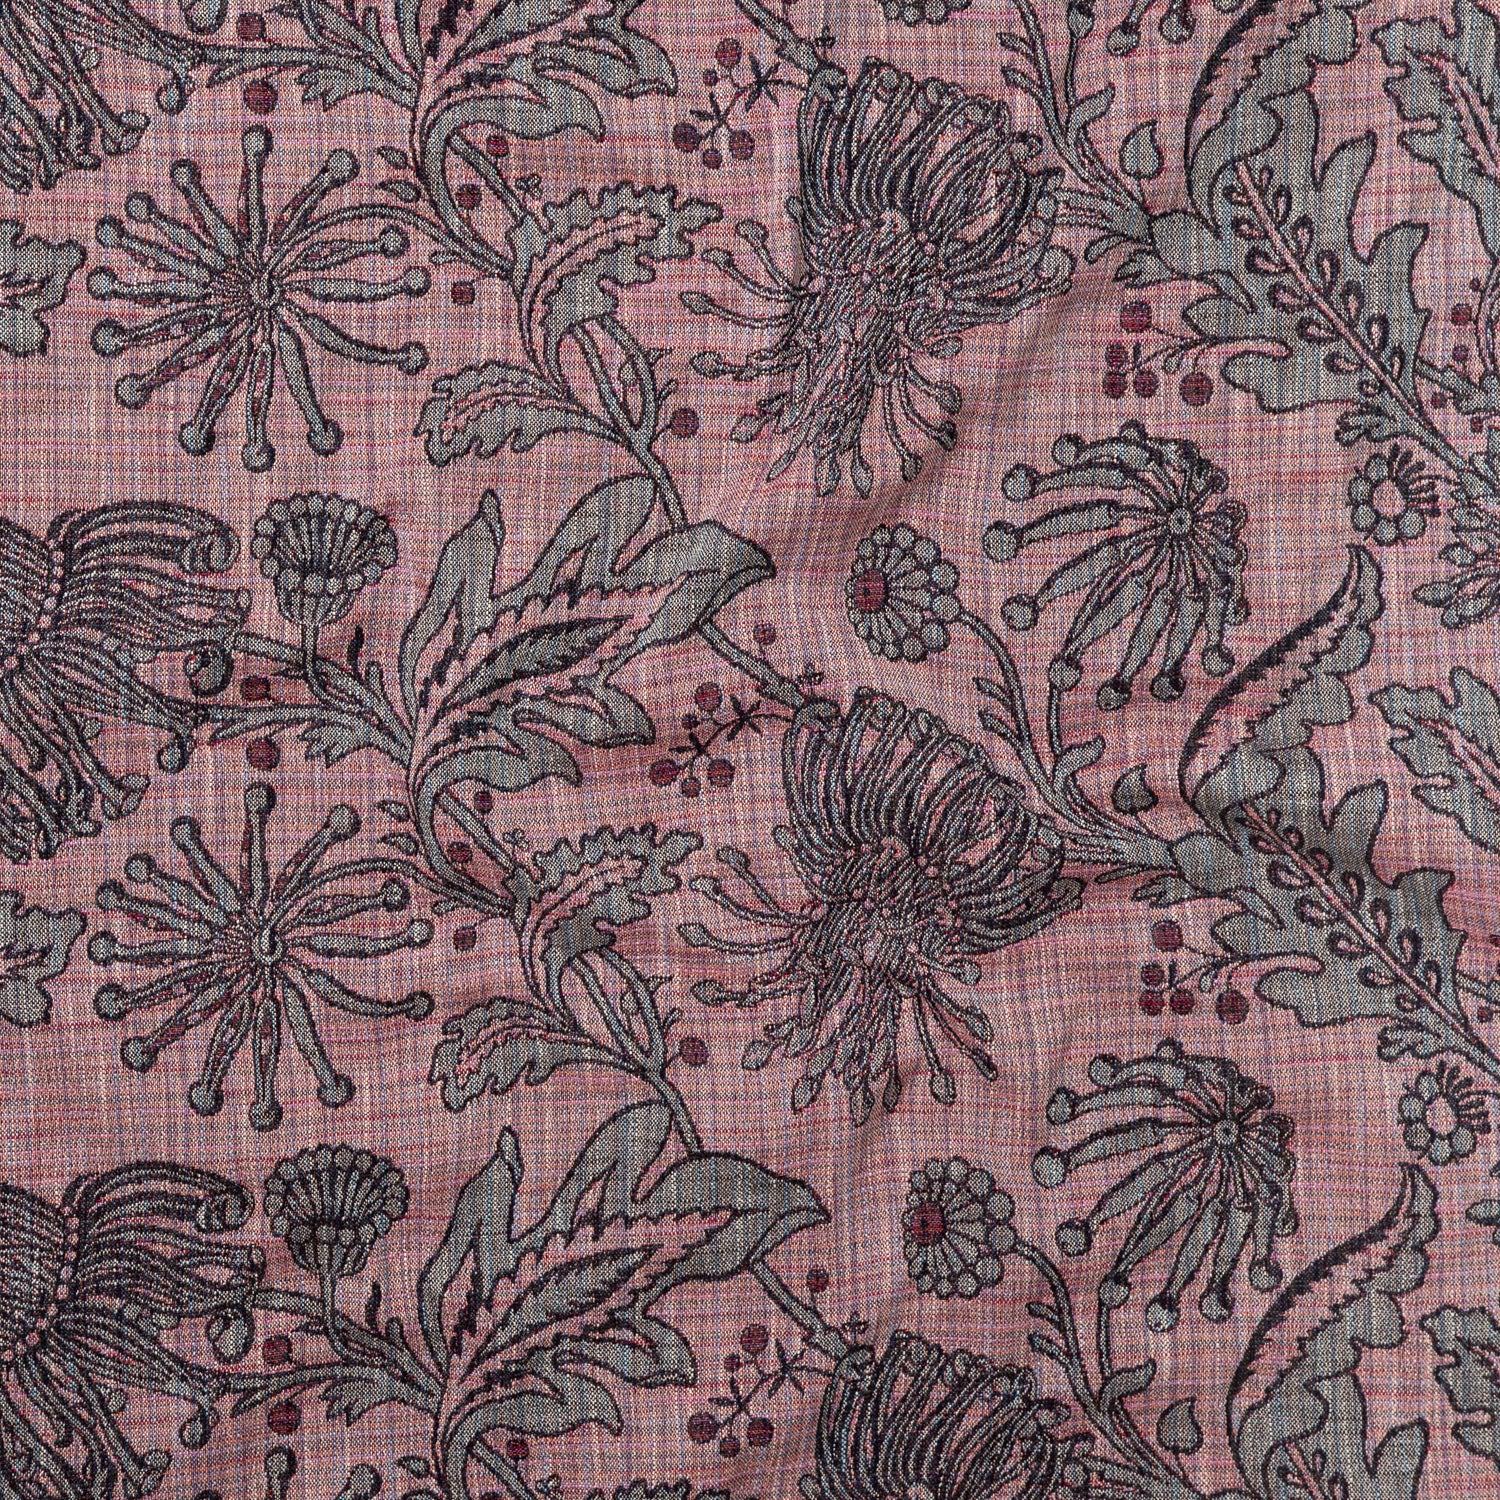 Draped fabric yardage in a large-scale floral print in gray and red on a pink field.